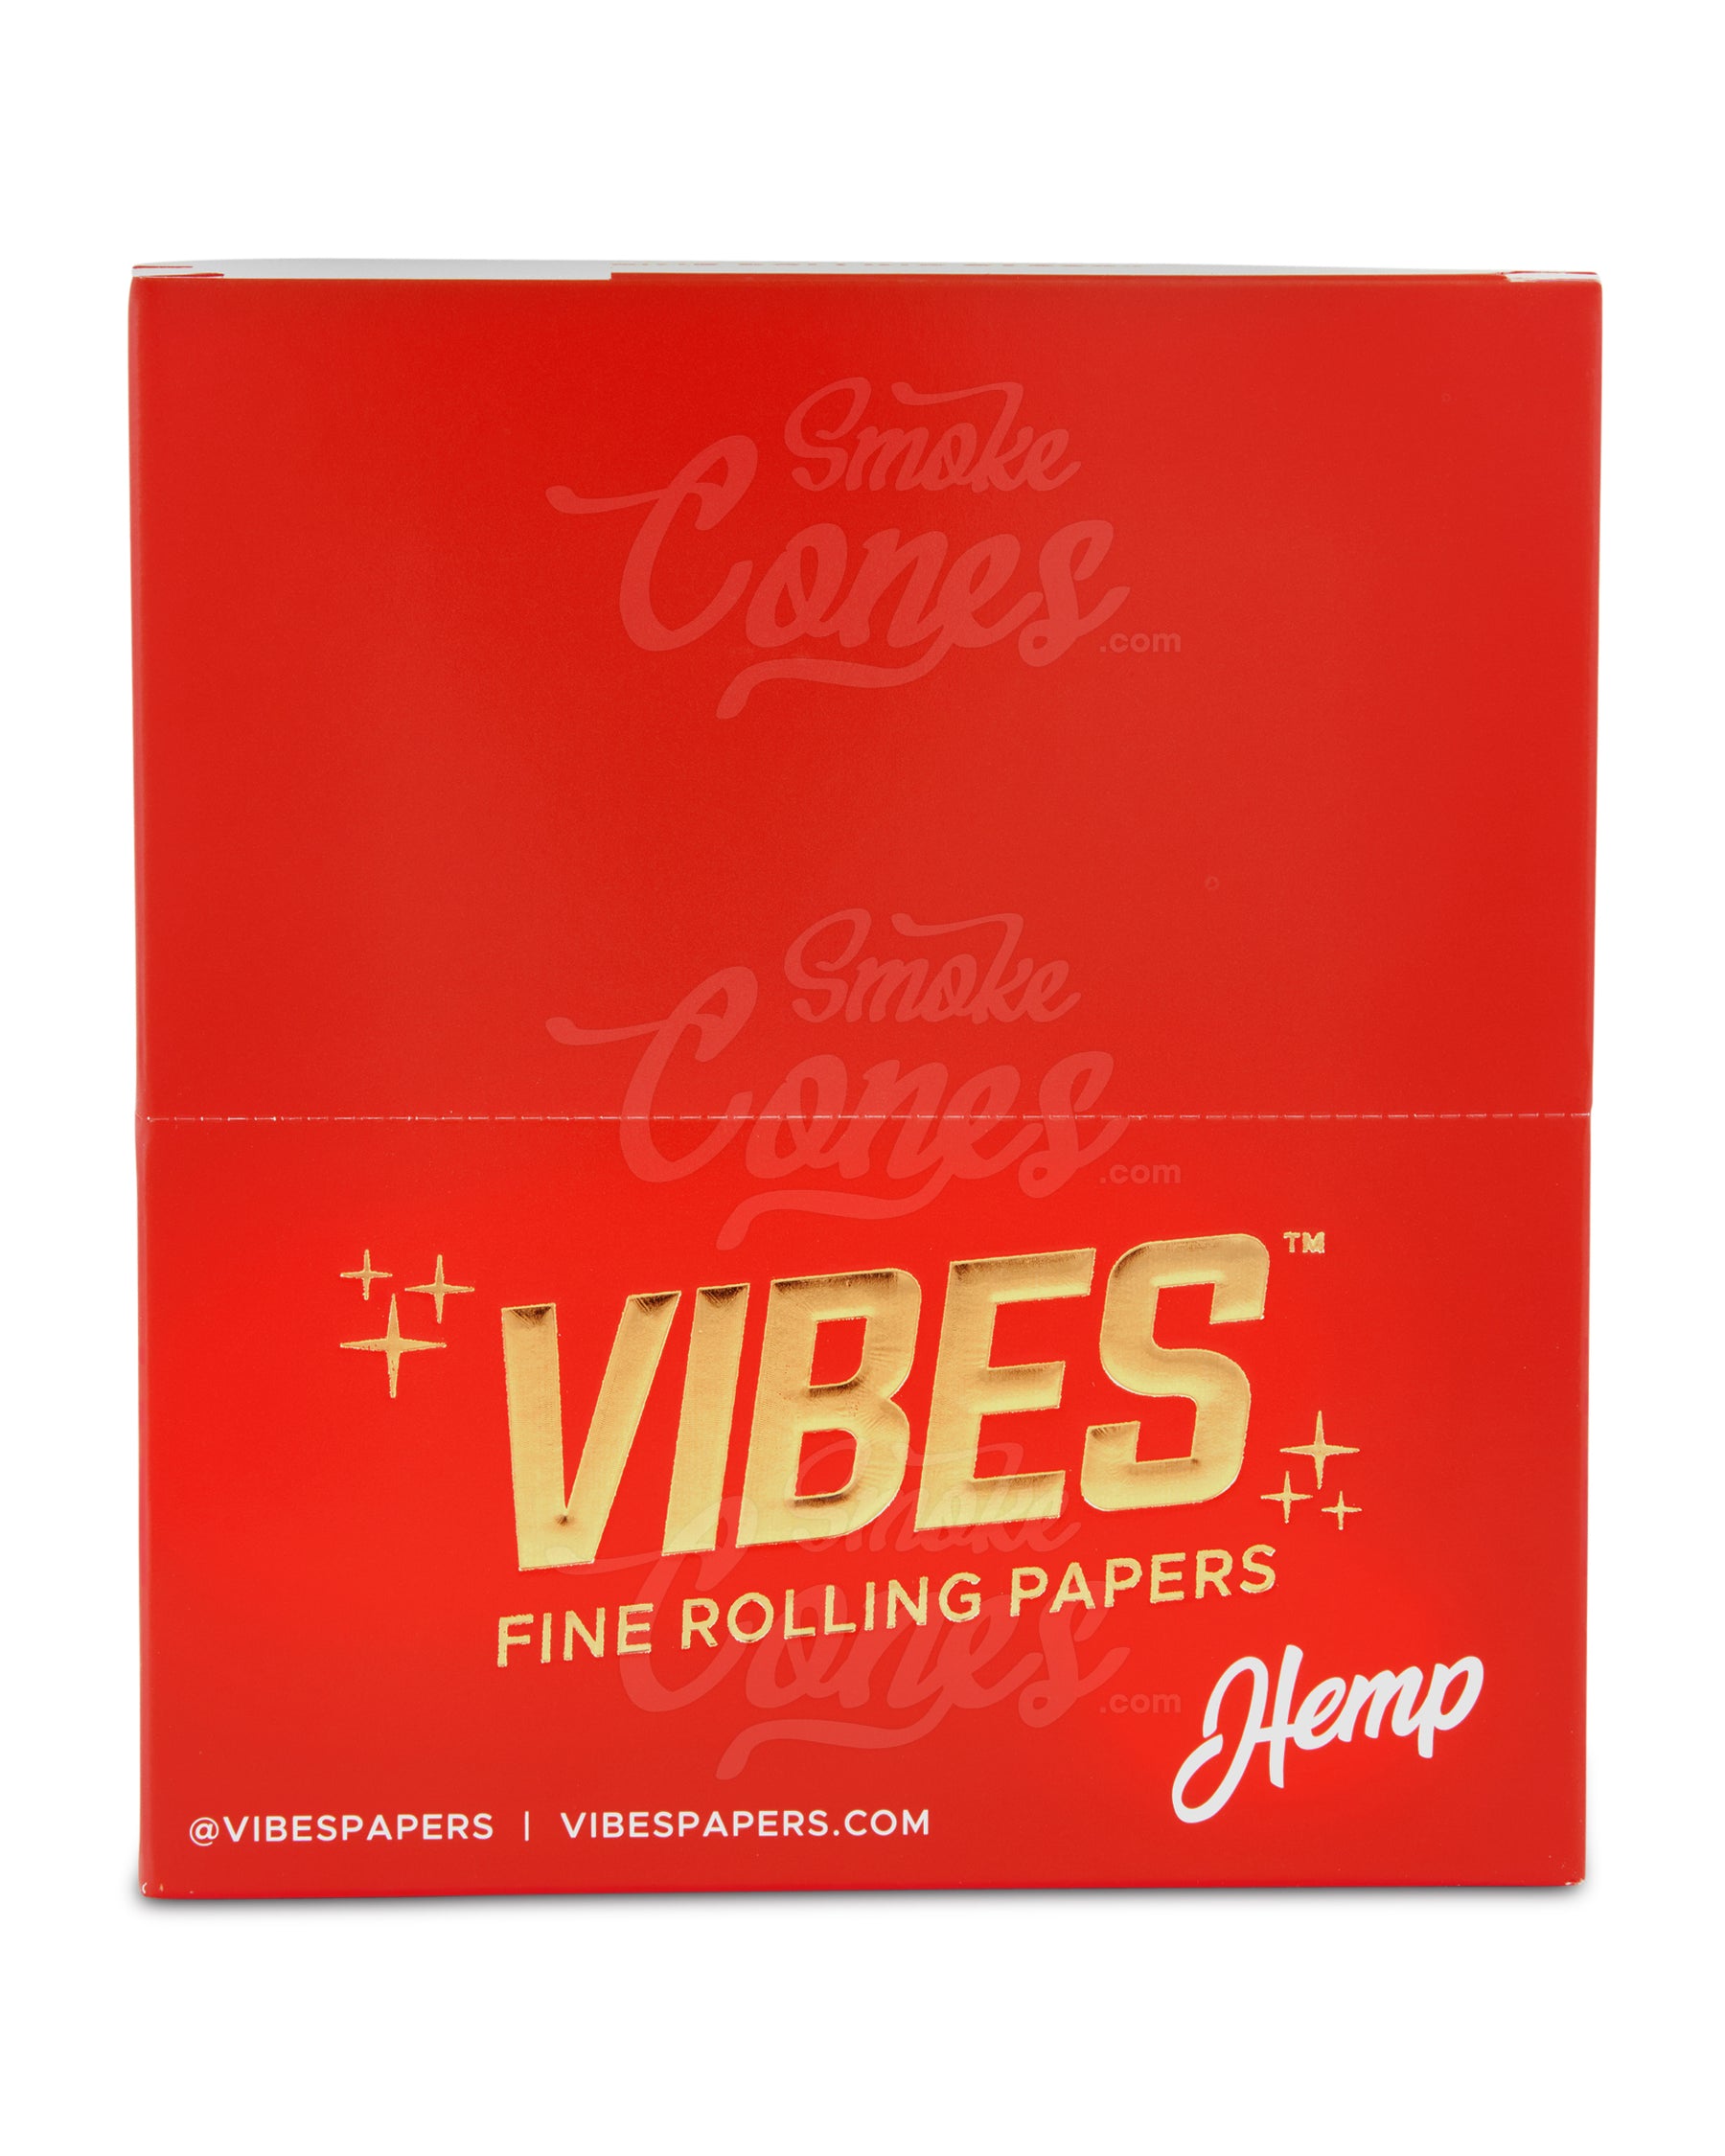 Vibes 110mm King Sized The Cali 2 Gram Pre Rolled Hemp Paper Cones 24/Box - 7